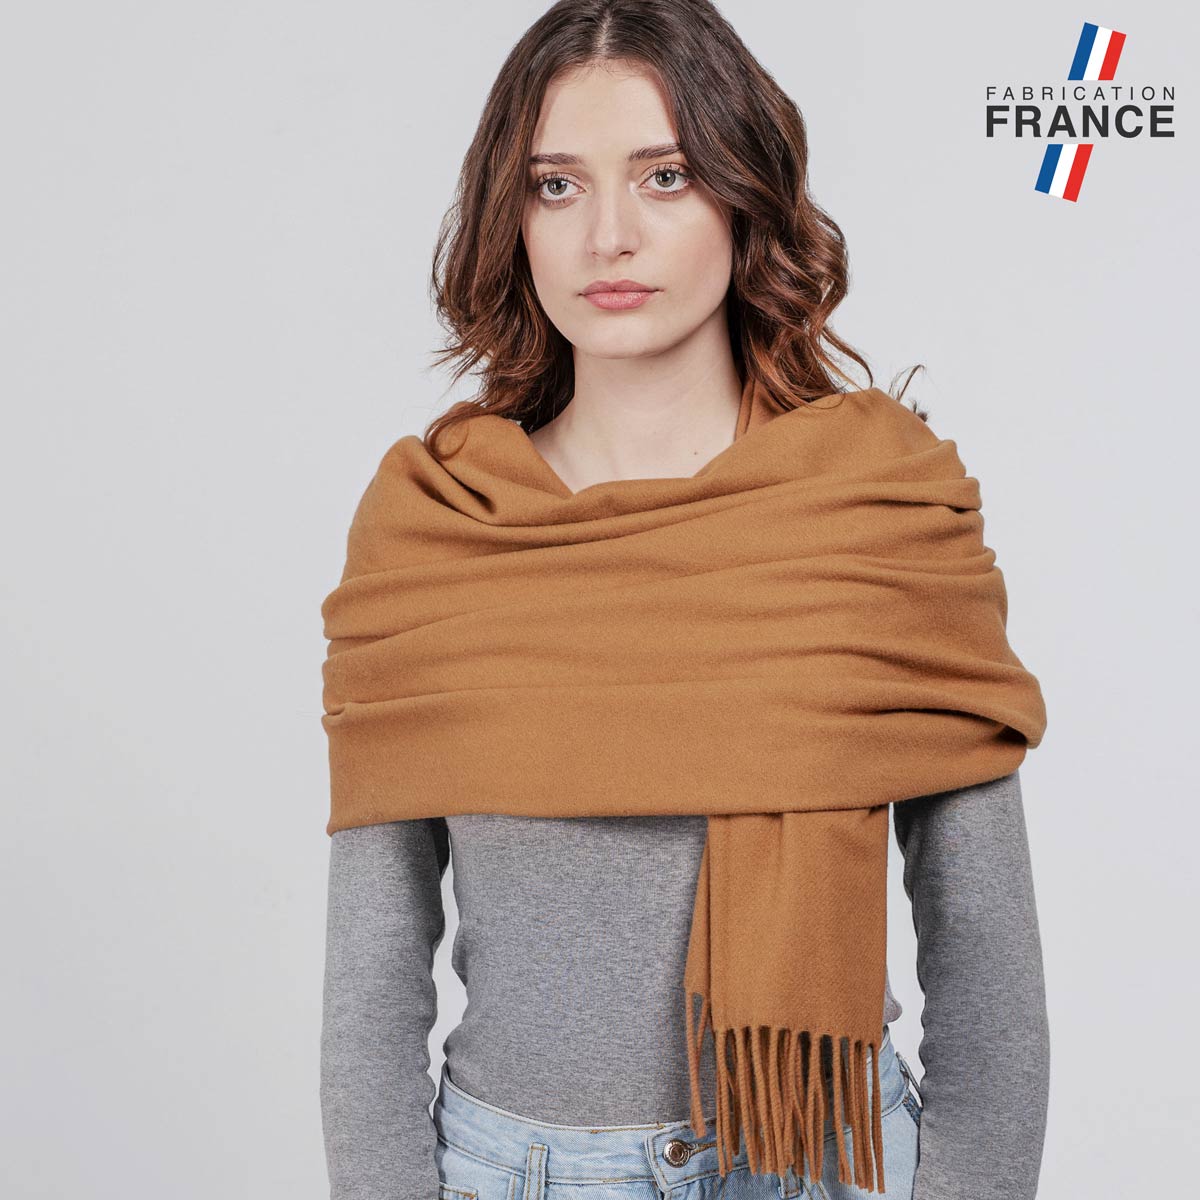 AT-06741_W12-1FR_Etole-femme-unie-beige-camel-made-in-france